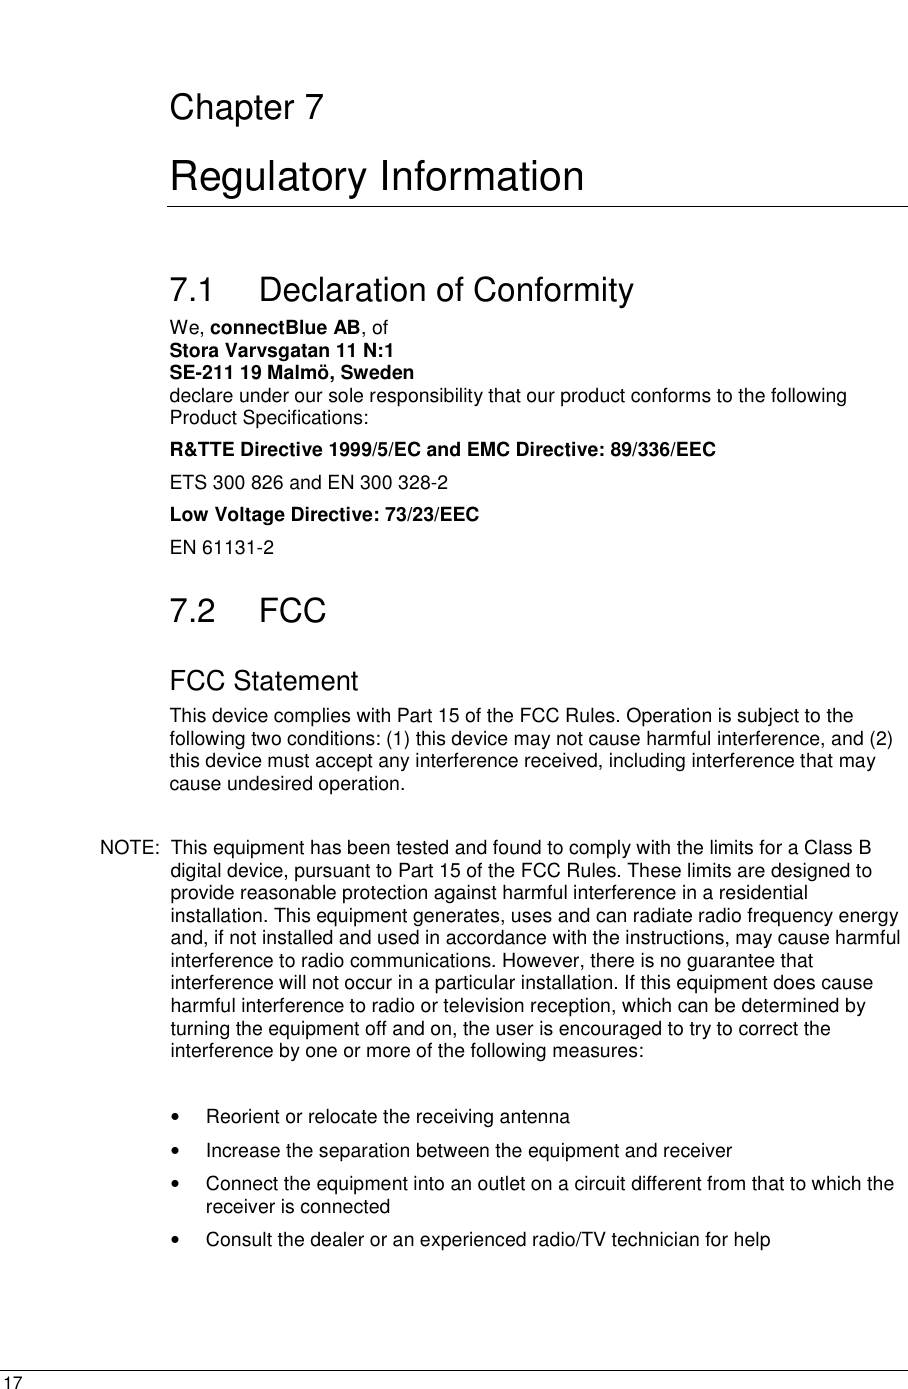  17  Chapter 7 Regulatory Information 7.1 Declaration of Conformity We, connectBlue AB, of  Stora Varvsgatan 11 N:1 SE-211 19 Malmö, Sweden declare under our sole responsibility that our product conforms to the following Product Specifications: R&amp;TTE Directive 1999/5/EC and EMC Directive: 89/336/EEC ETS 300 826 and EN 300 328-2 Low Voltage Directive: 73/23/EEC EN 61131-2  7.2 FCC FCC Statement This device complies with Part 15 of the FCC Rules. Operation is subject to the following two conditions: (1) this device may not cause harmful interference, and (2) this device must accept any interference received, including interference that may cause undesired operation.  NOTE:  This equipment has been tested and found to comply with the limits for a Class B digital device, pursuant to Part 15 of the FCC Rules. These limits are designed to provide reasonable protection against harmful interference in a residential installation. This equipment generates, uses and can radiate radio frequency energy and, if not installed and used in accordance with the instructions, may cause harmful interference to radio communications. However, there is no guarantee that interference will not occur in a particular installation. If this equipment does cause harmful interference to radio or television reception, which can be determined by turning the equipment off and on, the user is encouraged to try to correct the interference by one or more of the following measures:  •  Reorient or relocate the receiving antenna •  Increase the separation between the equipment and receiver •  Connect the equipment into an outlet on a circuit different from that to which the receiver is connected •  Consult the dealer or an experienced radio/TV technician for help   